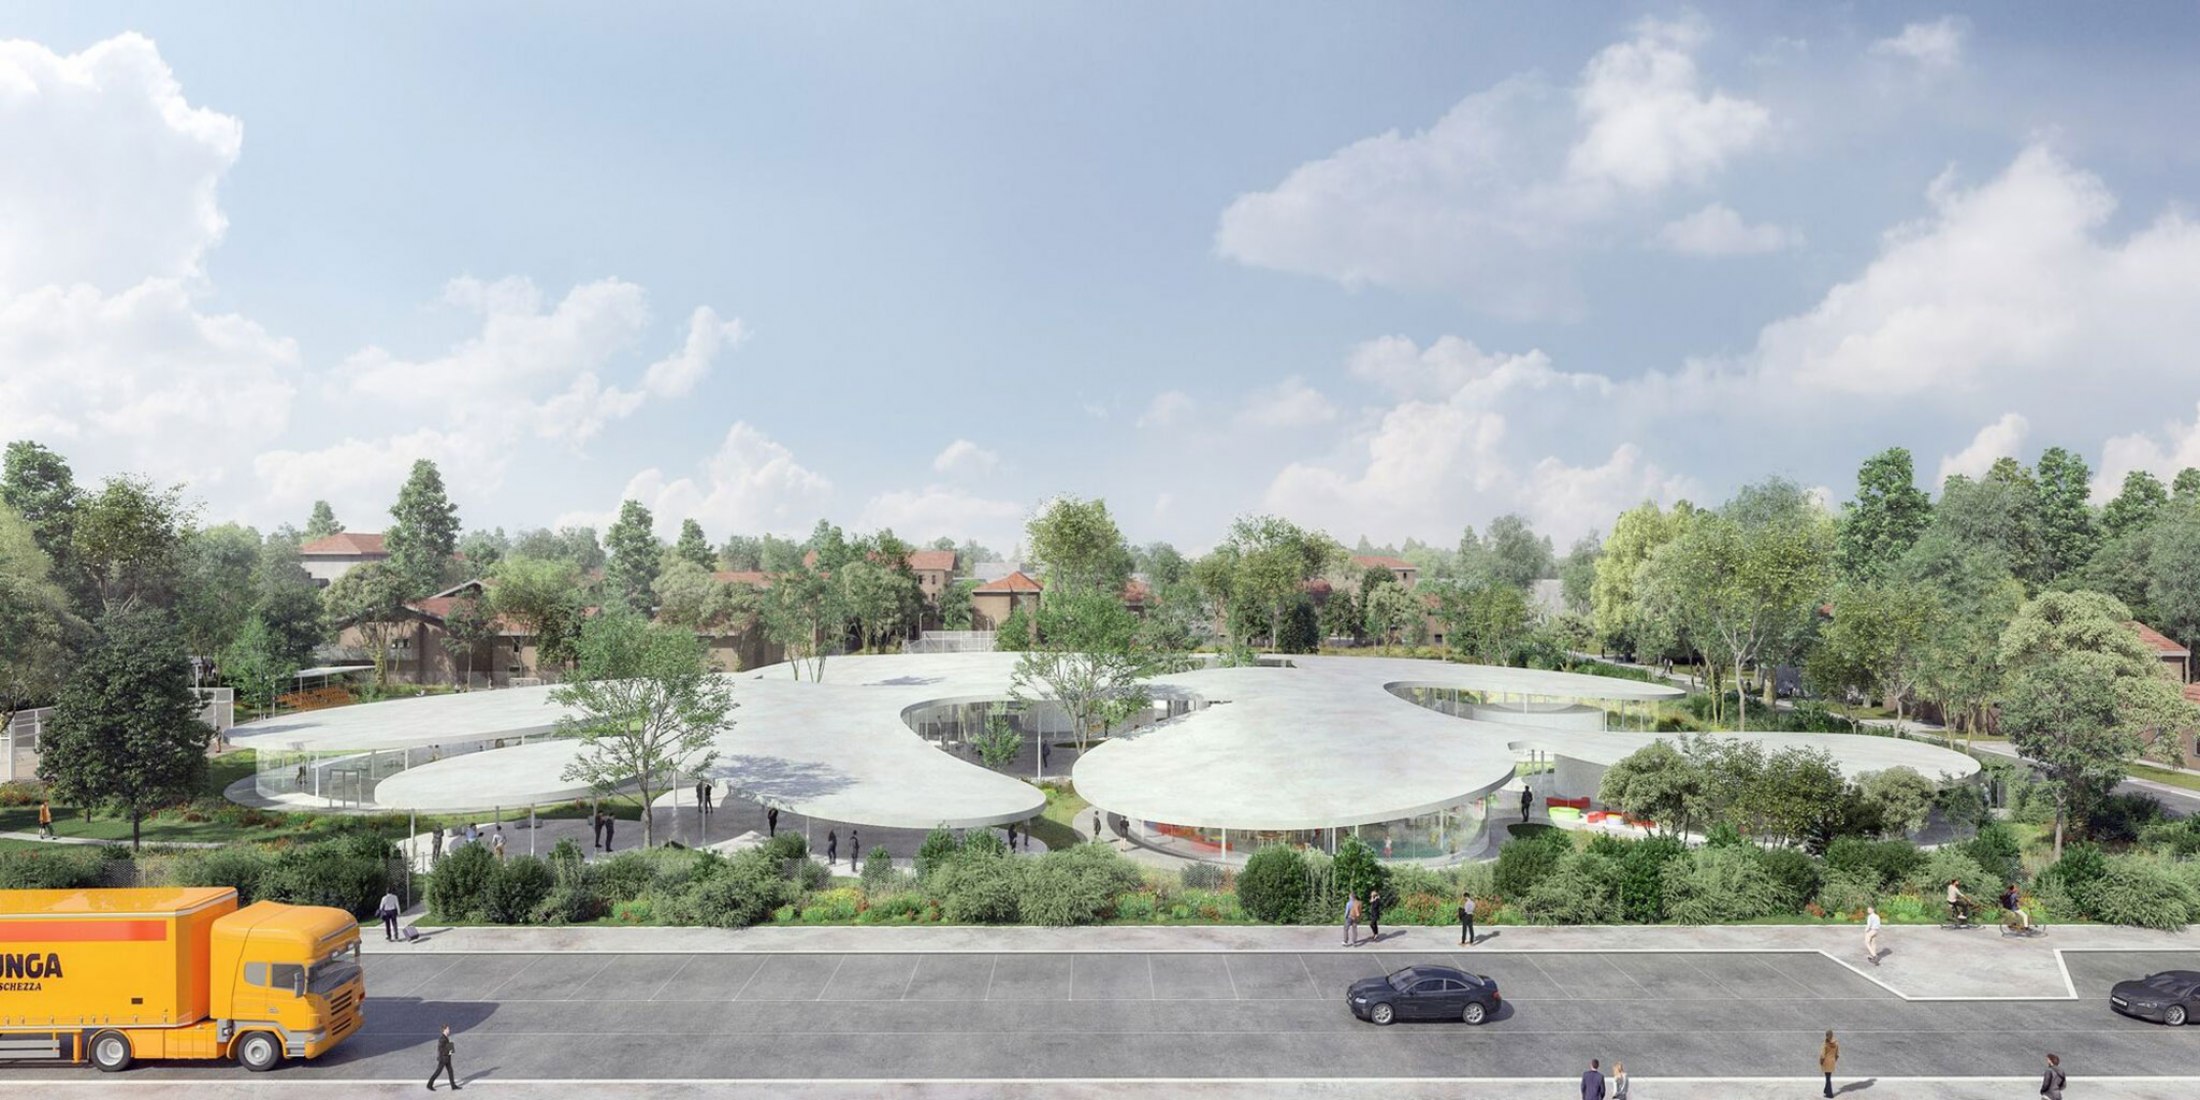 Campus for the Italian supermarket Esselunga by SANAA. Renderings courtesy of Esselunga